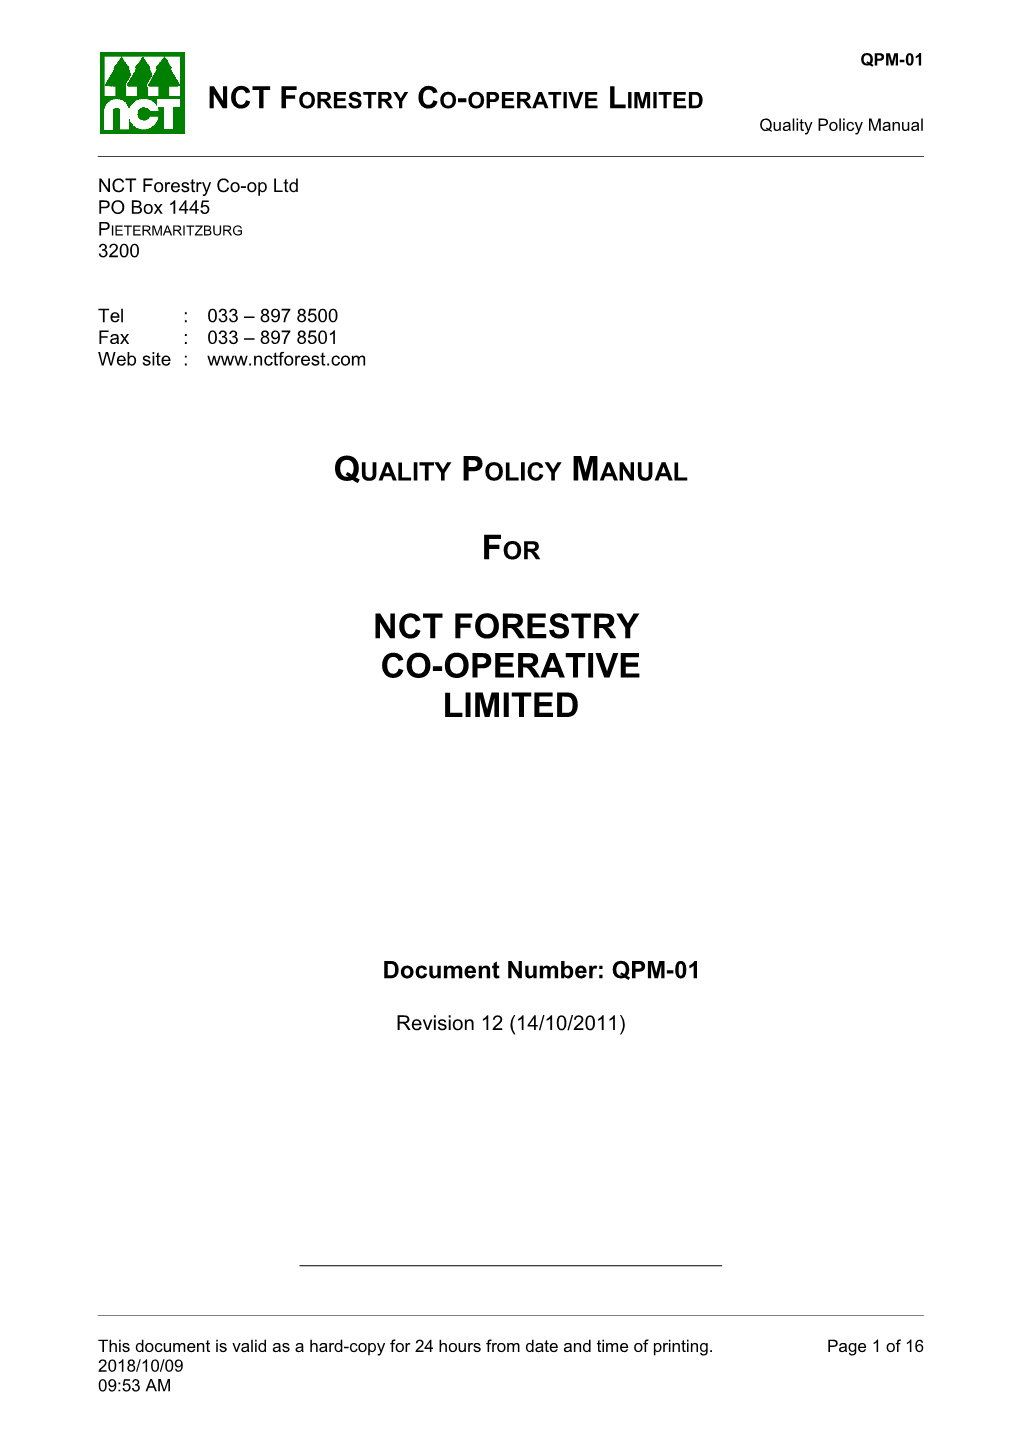 NCT Forestry Co-Operative Limited